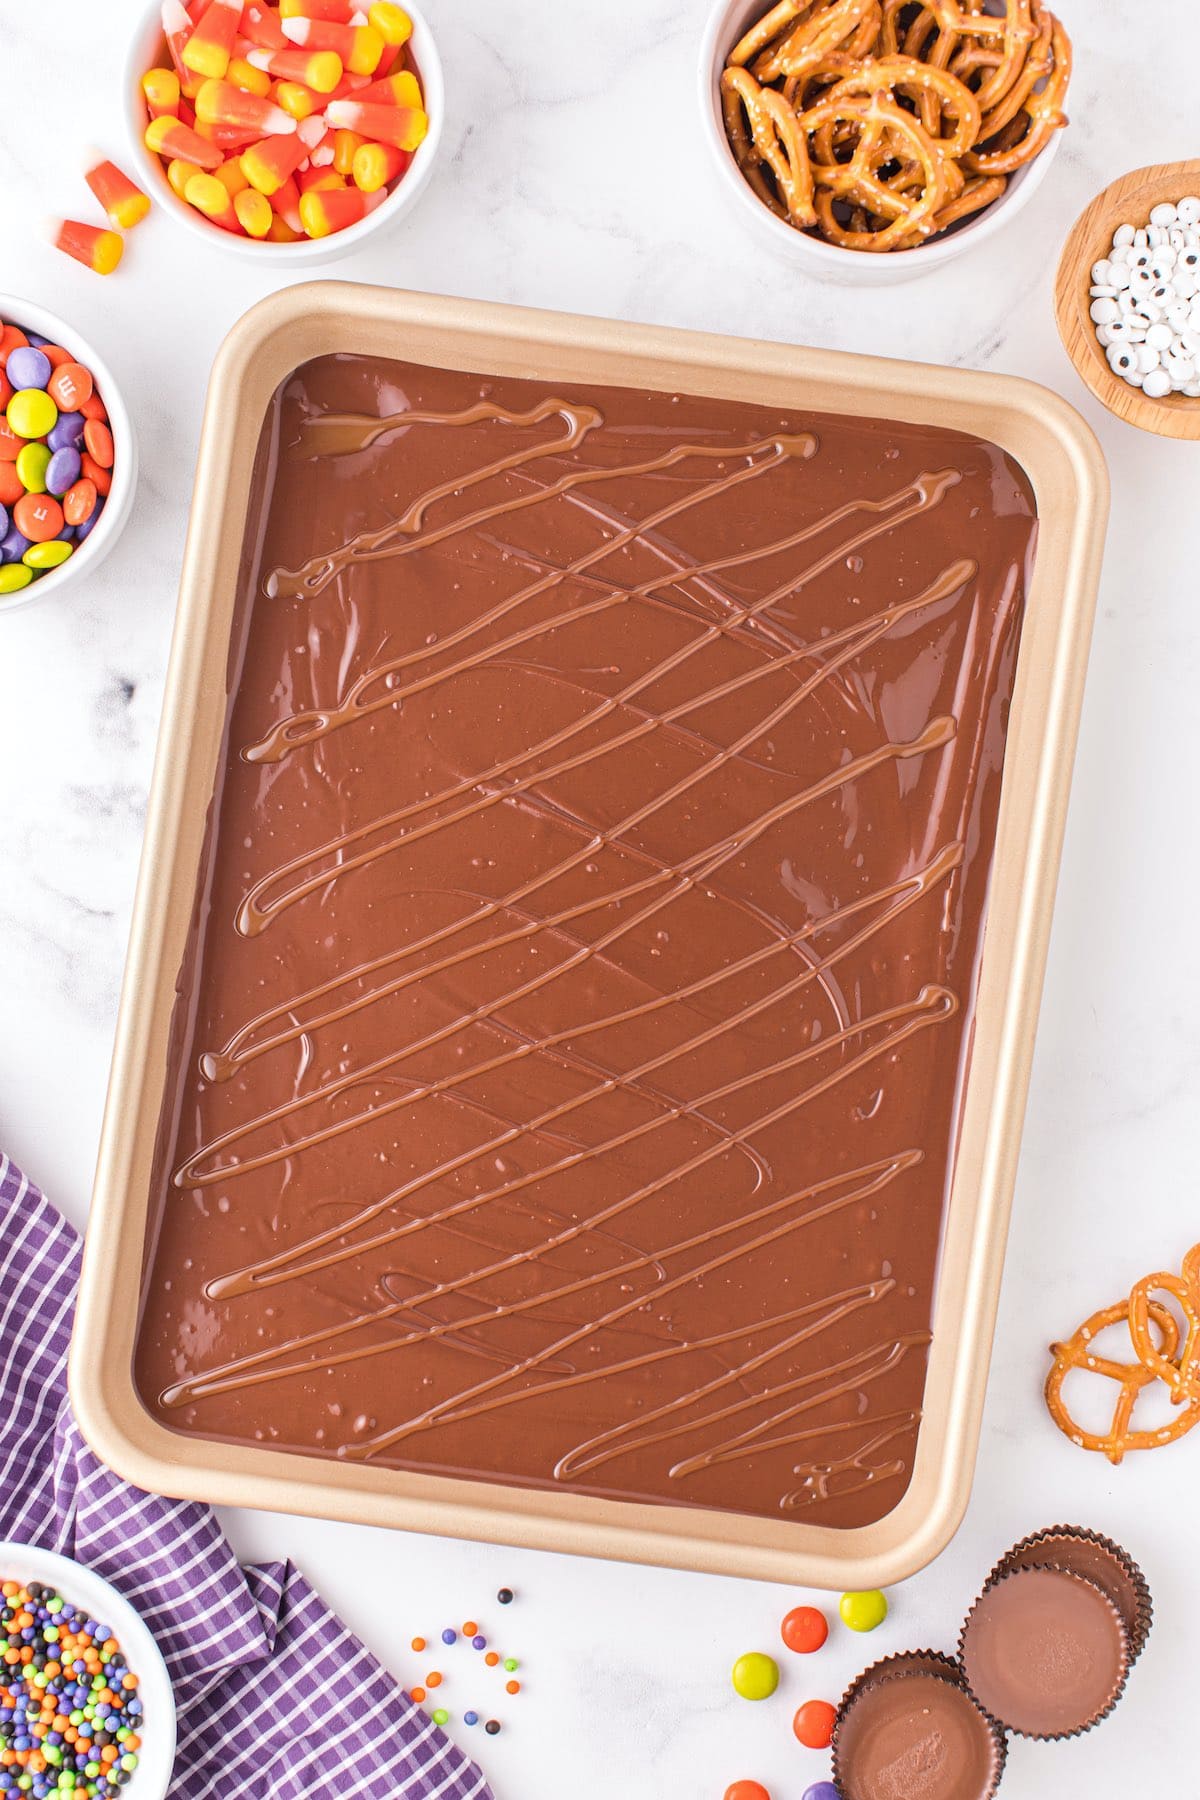 drizzle caramel over melted chocolate